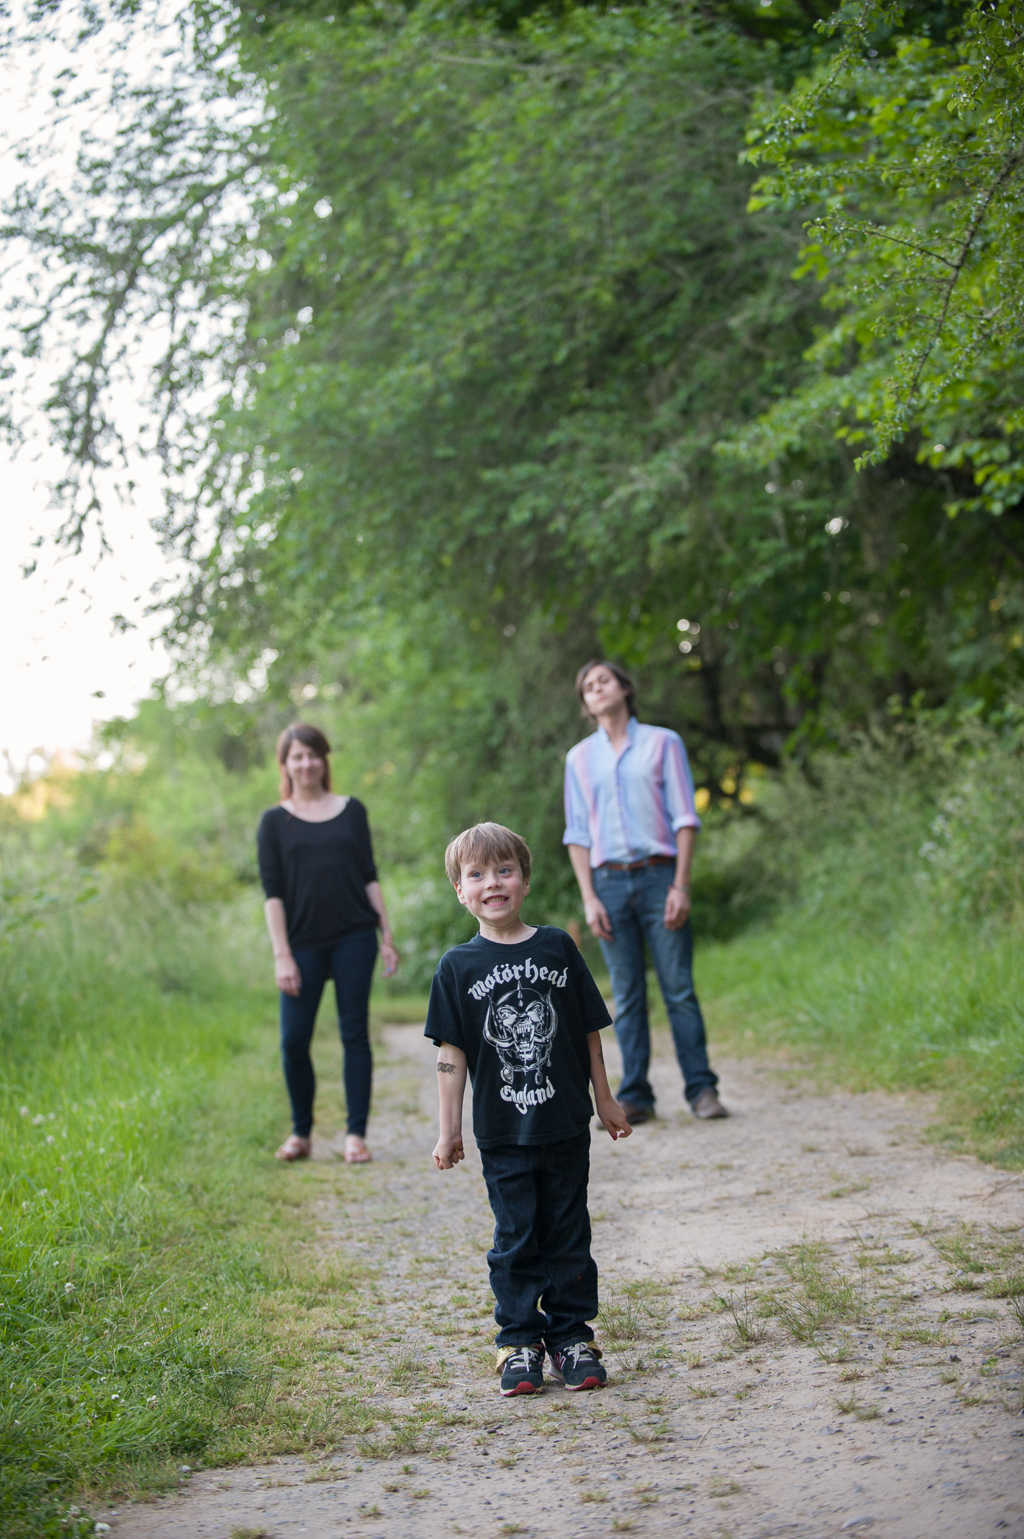 young boy wears motorhead t-shirt and stands in front of parents on a dirt trail